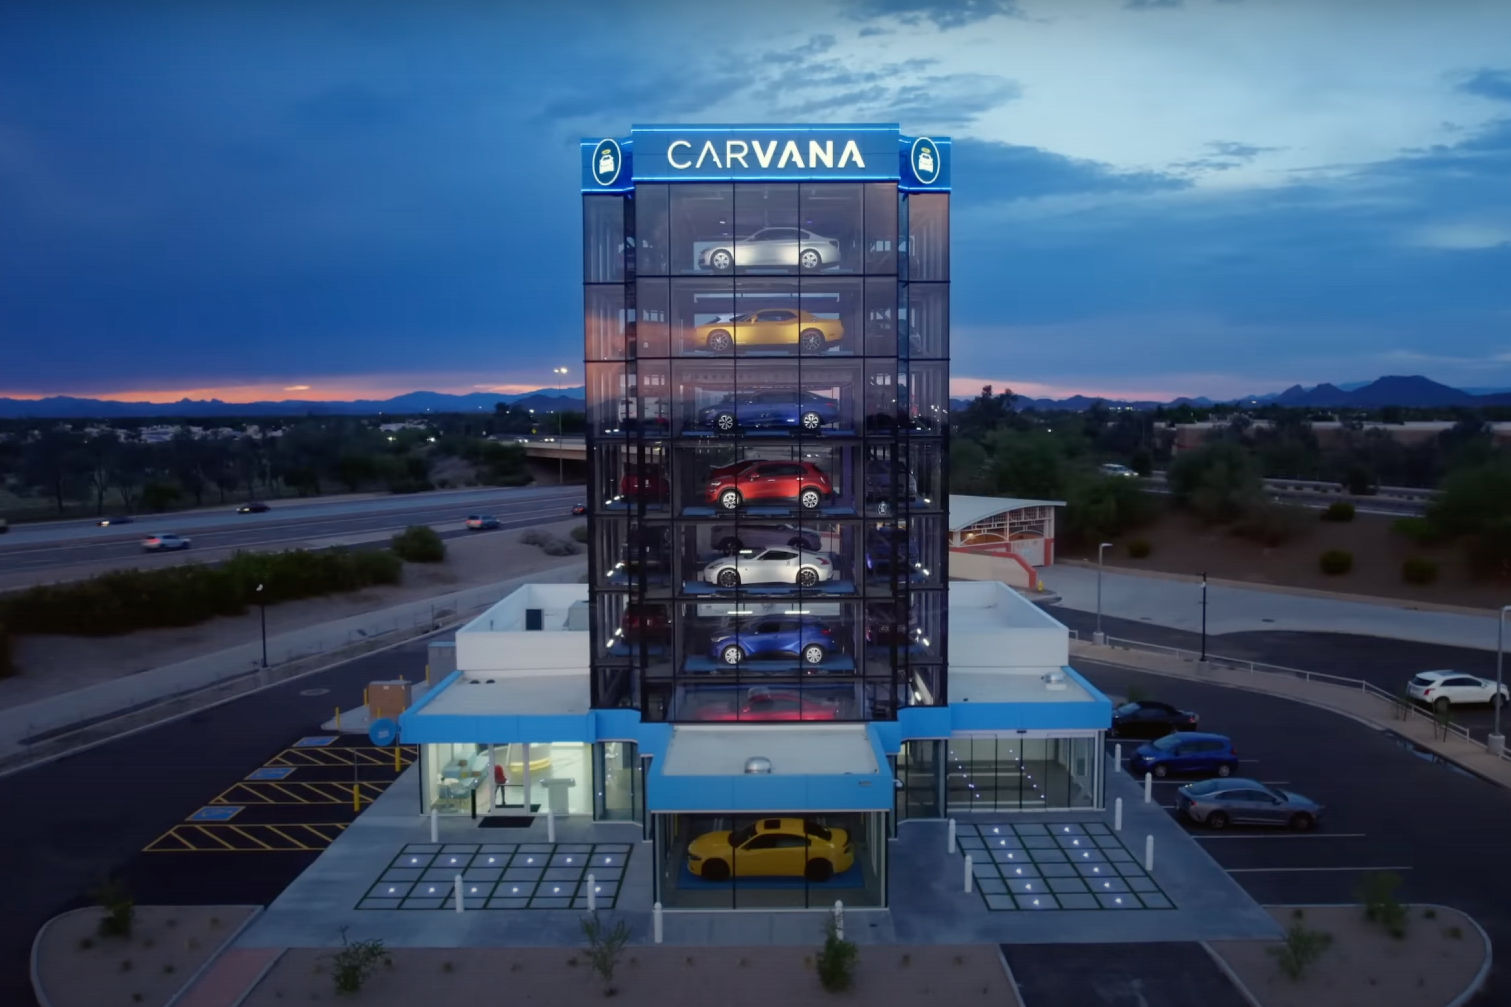 Exterior shot of Carvana Vending Machine during sunset with clouds in the back.